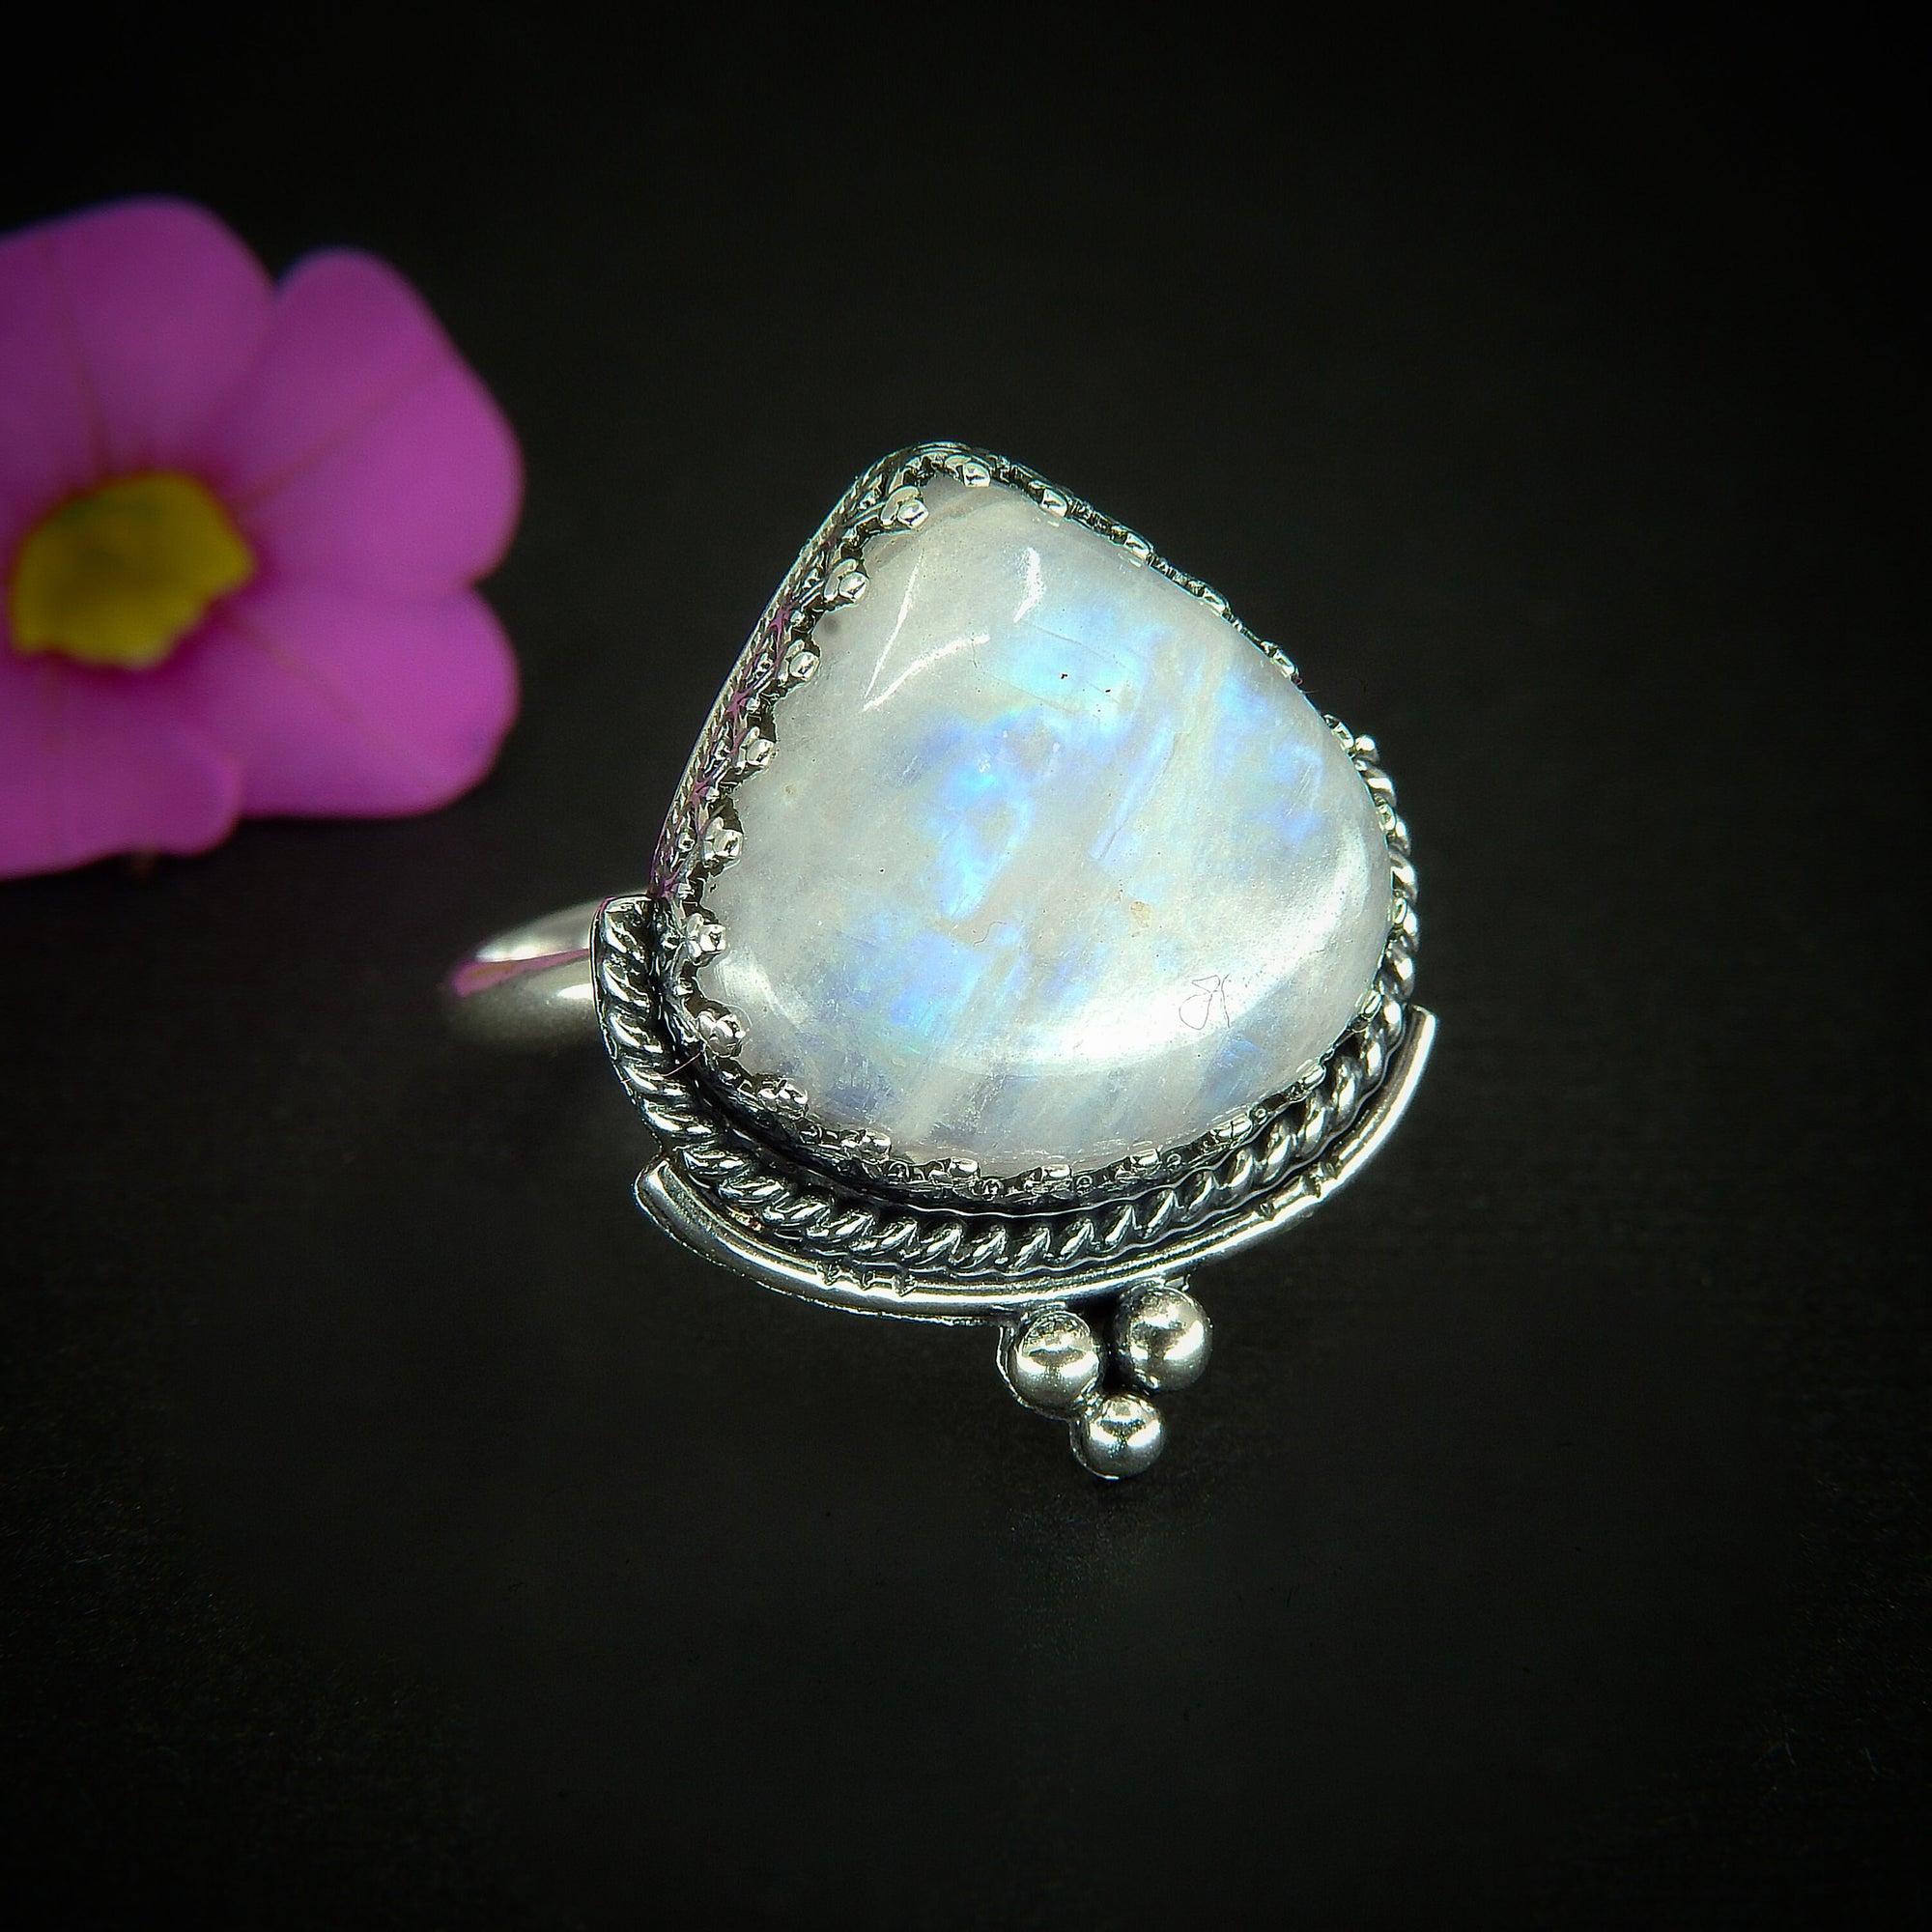 Moonstone Ring - Size 10 - Sterling Silver - Rainbow Moonstone Statement Ring - Blue Flash Moonstone Jewllery - Large Moonstone Ring OOAK